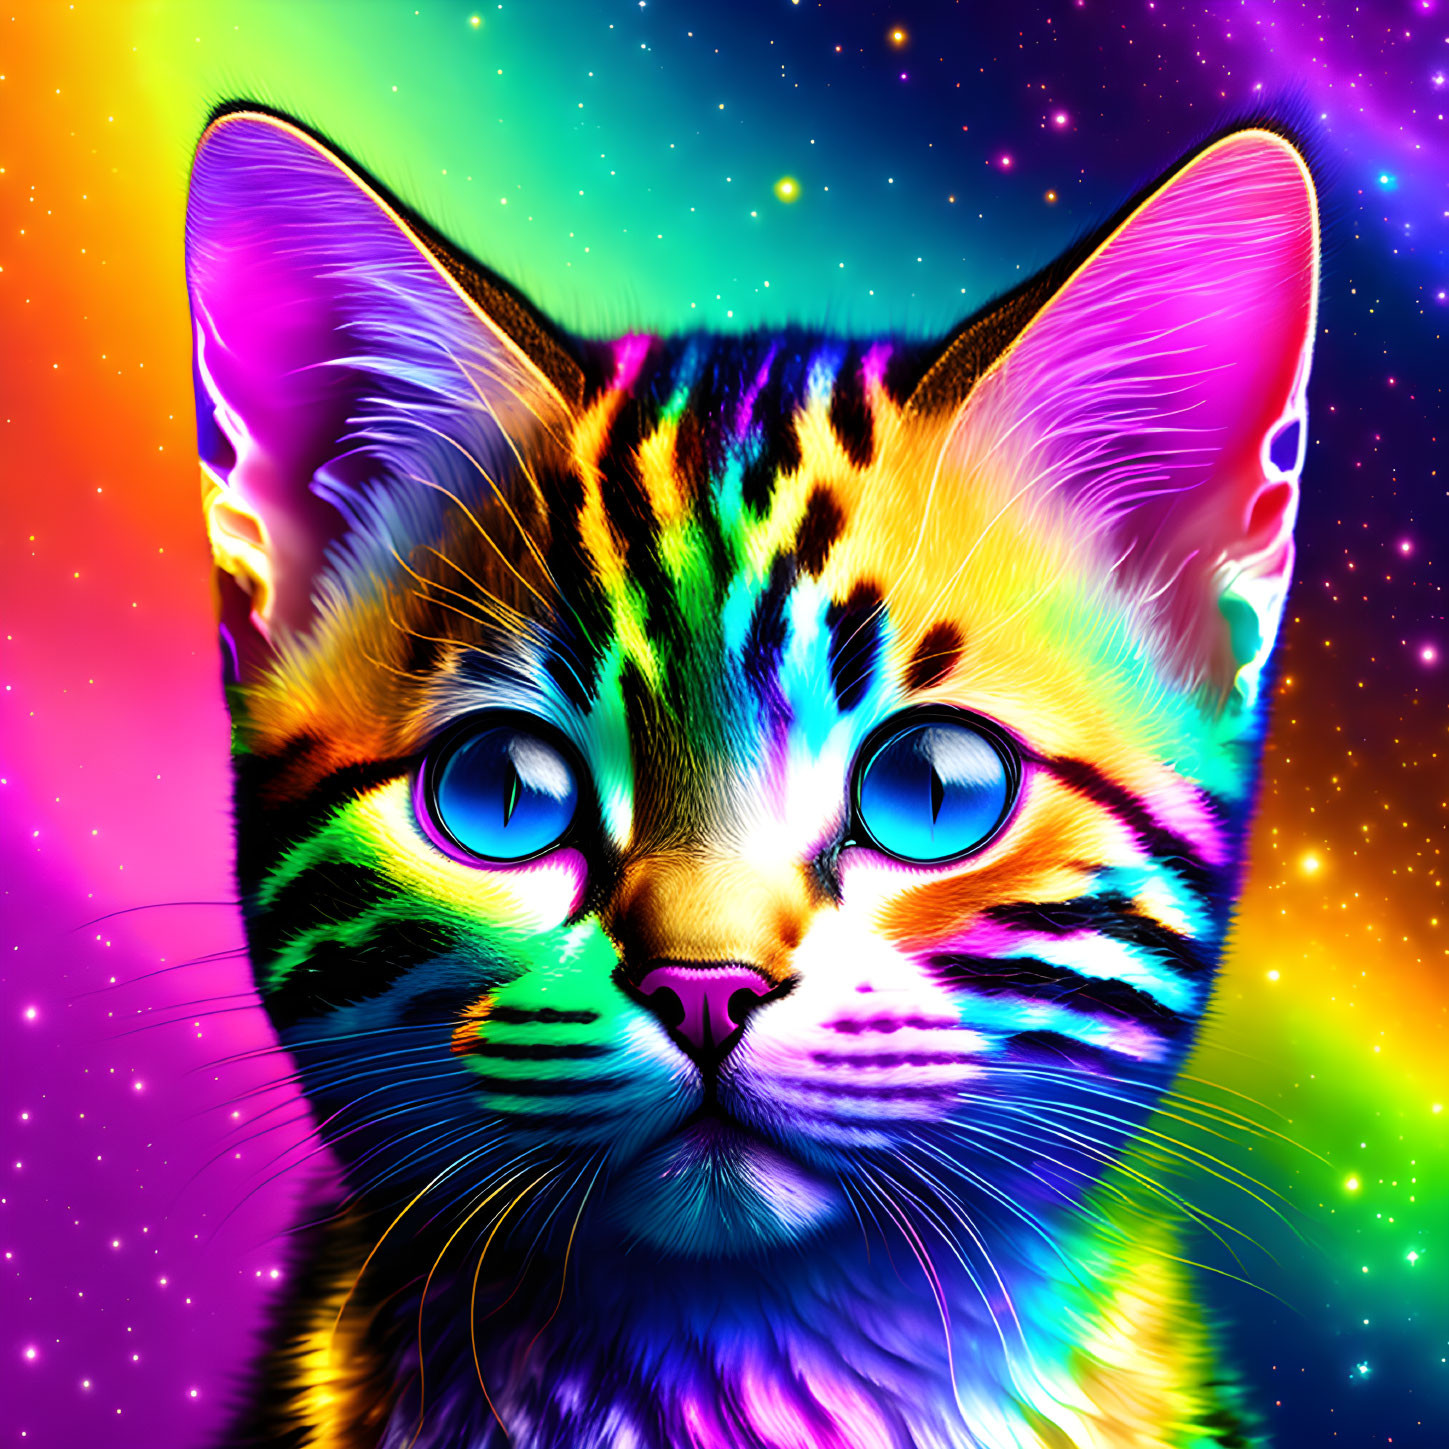 Colorful Cat Artwork with Expressive Blue Eyes on Neon Rainbow Background